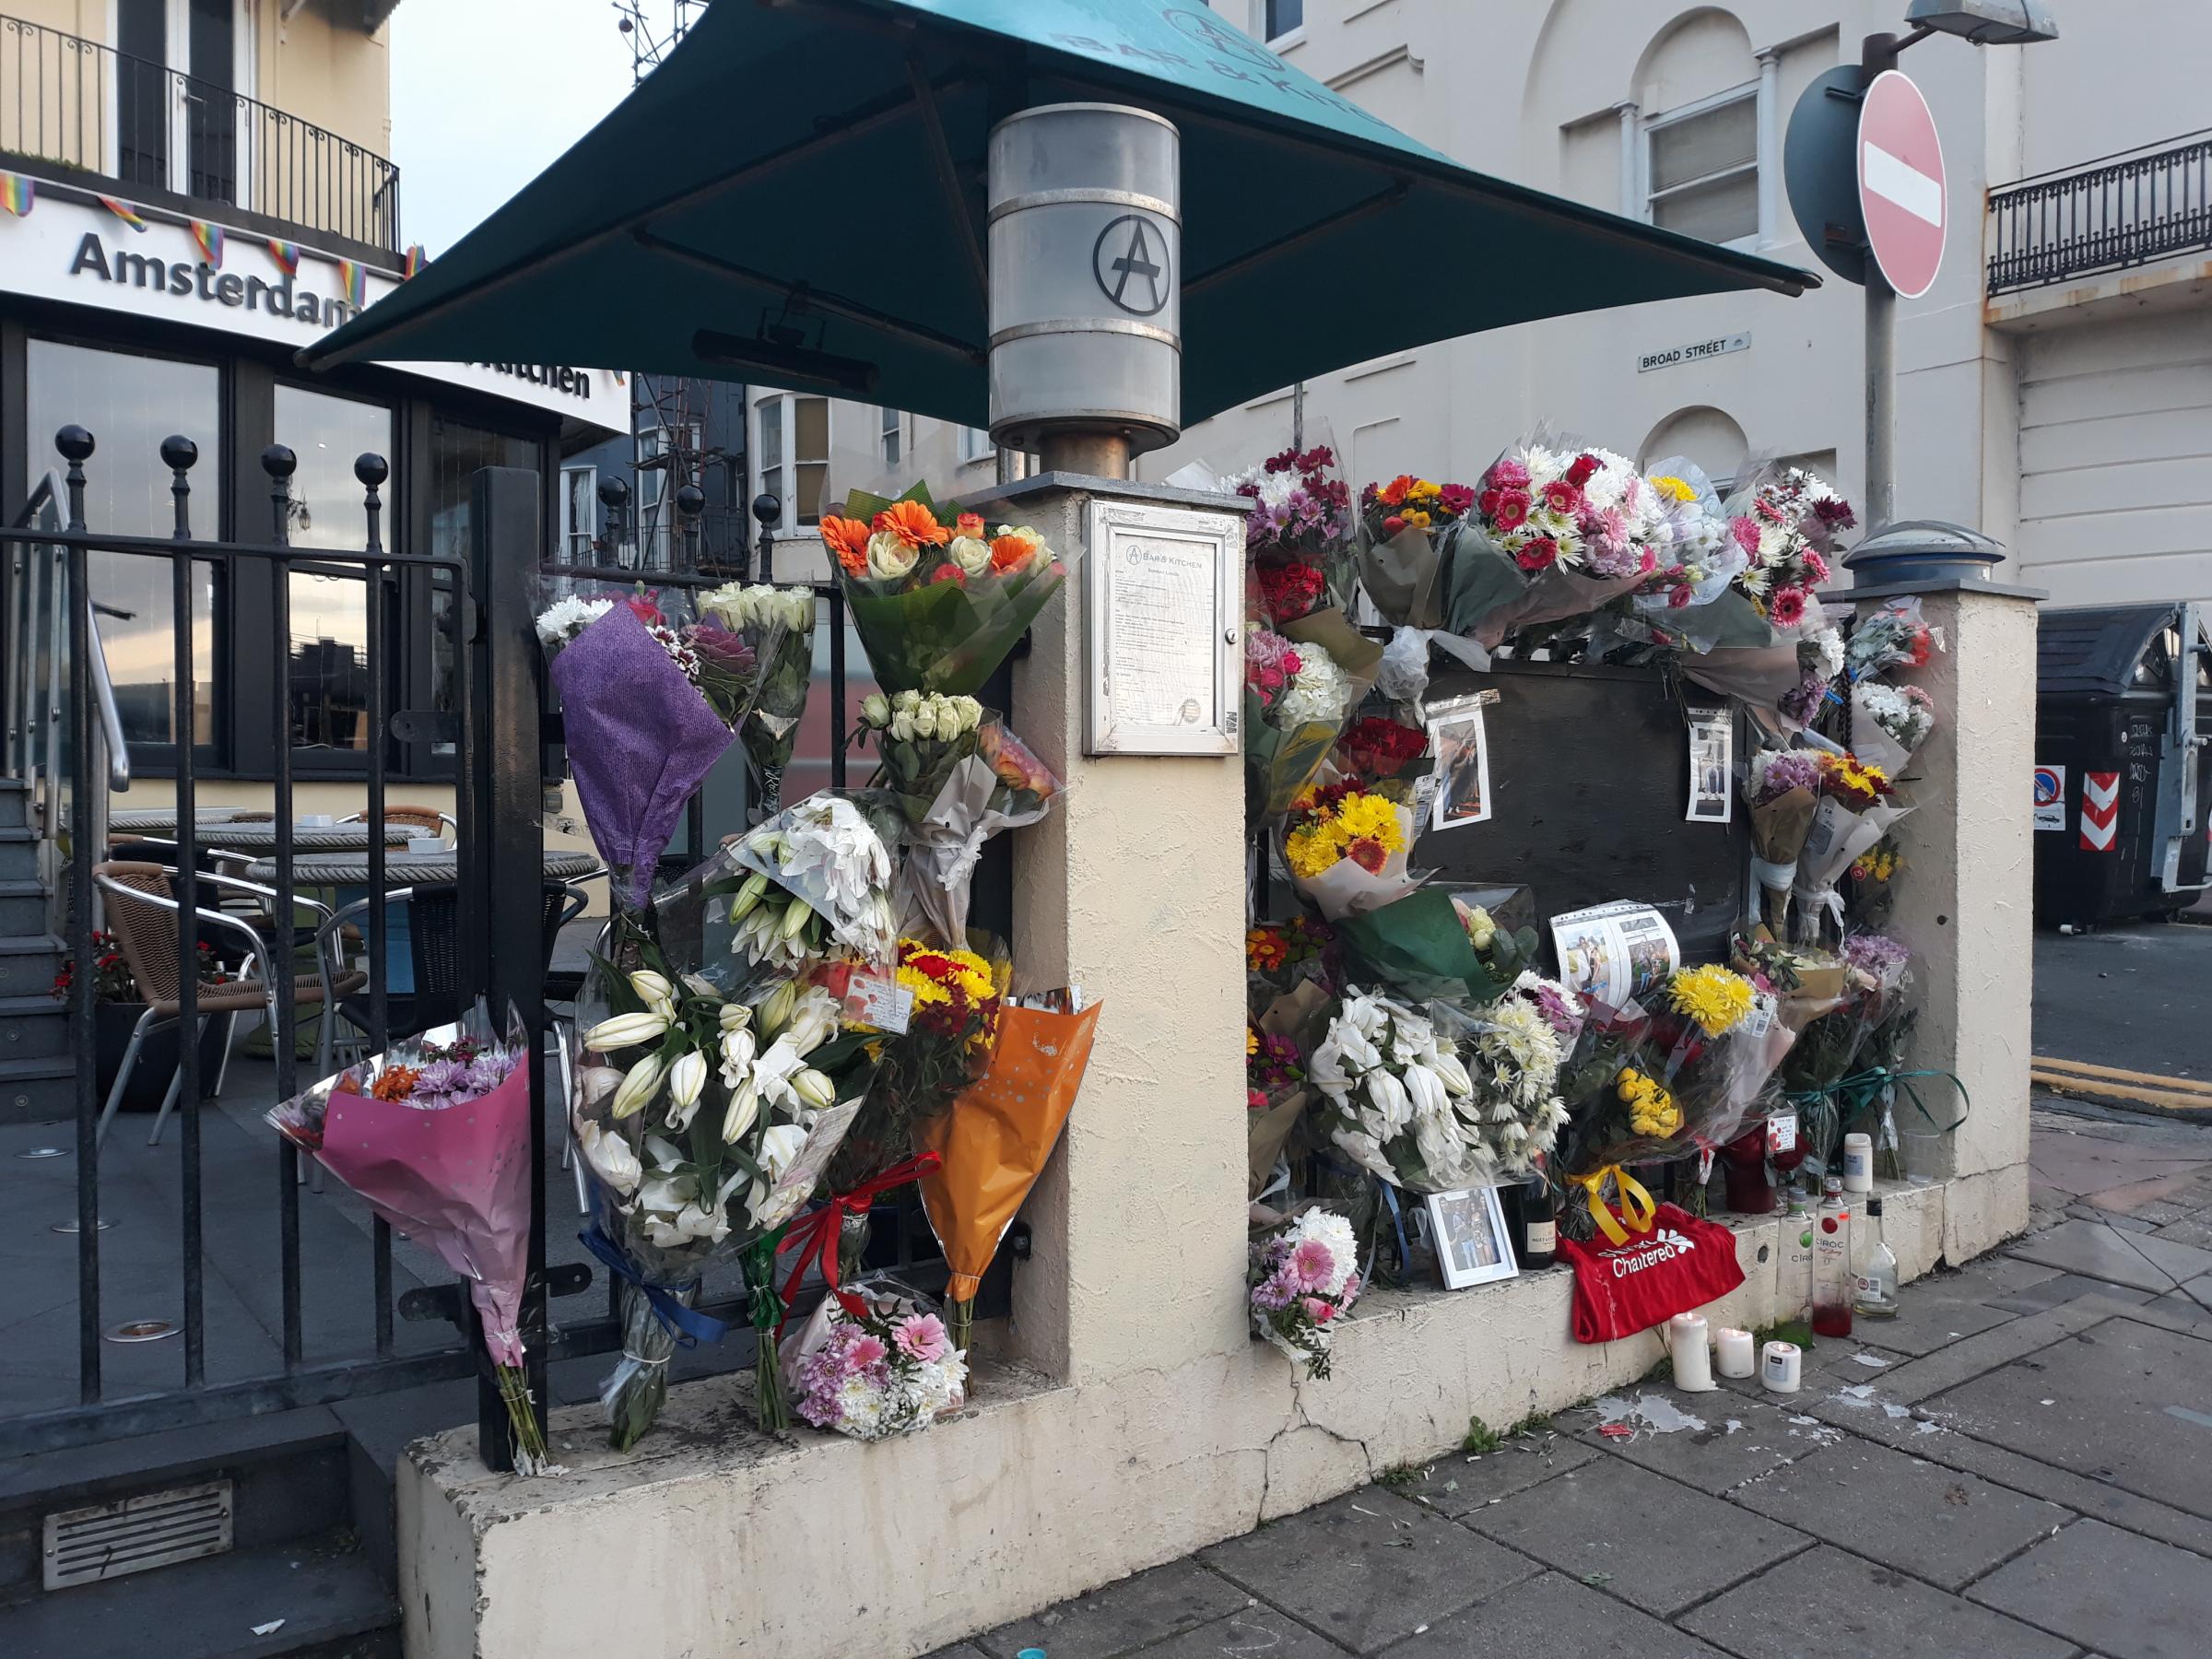 Tributes have been left to Suel Delgado outside The Amsterdam Hotel in Marine Parade